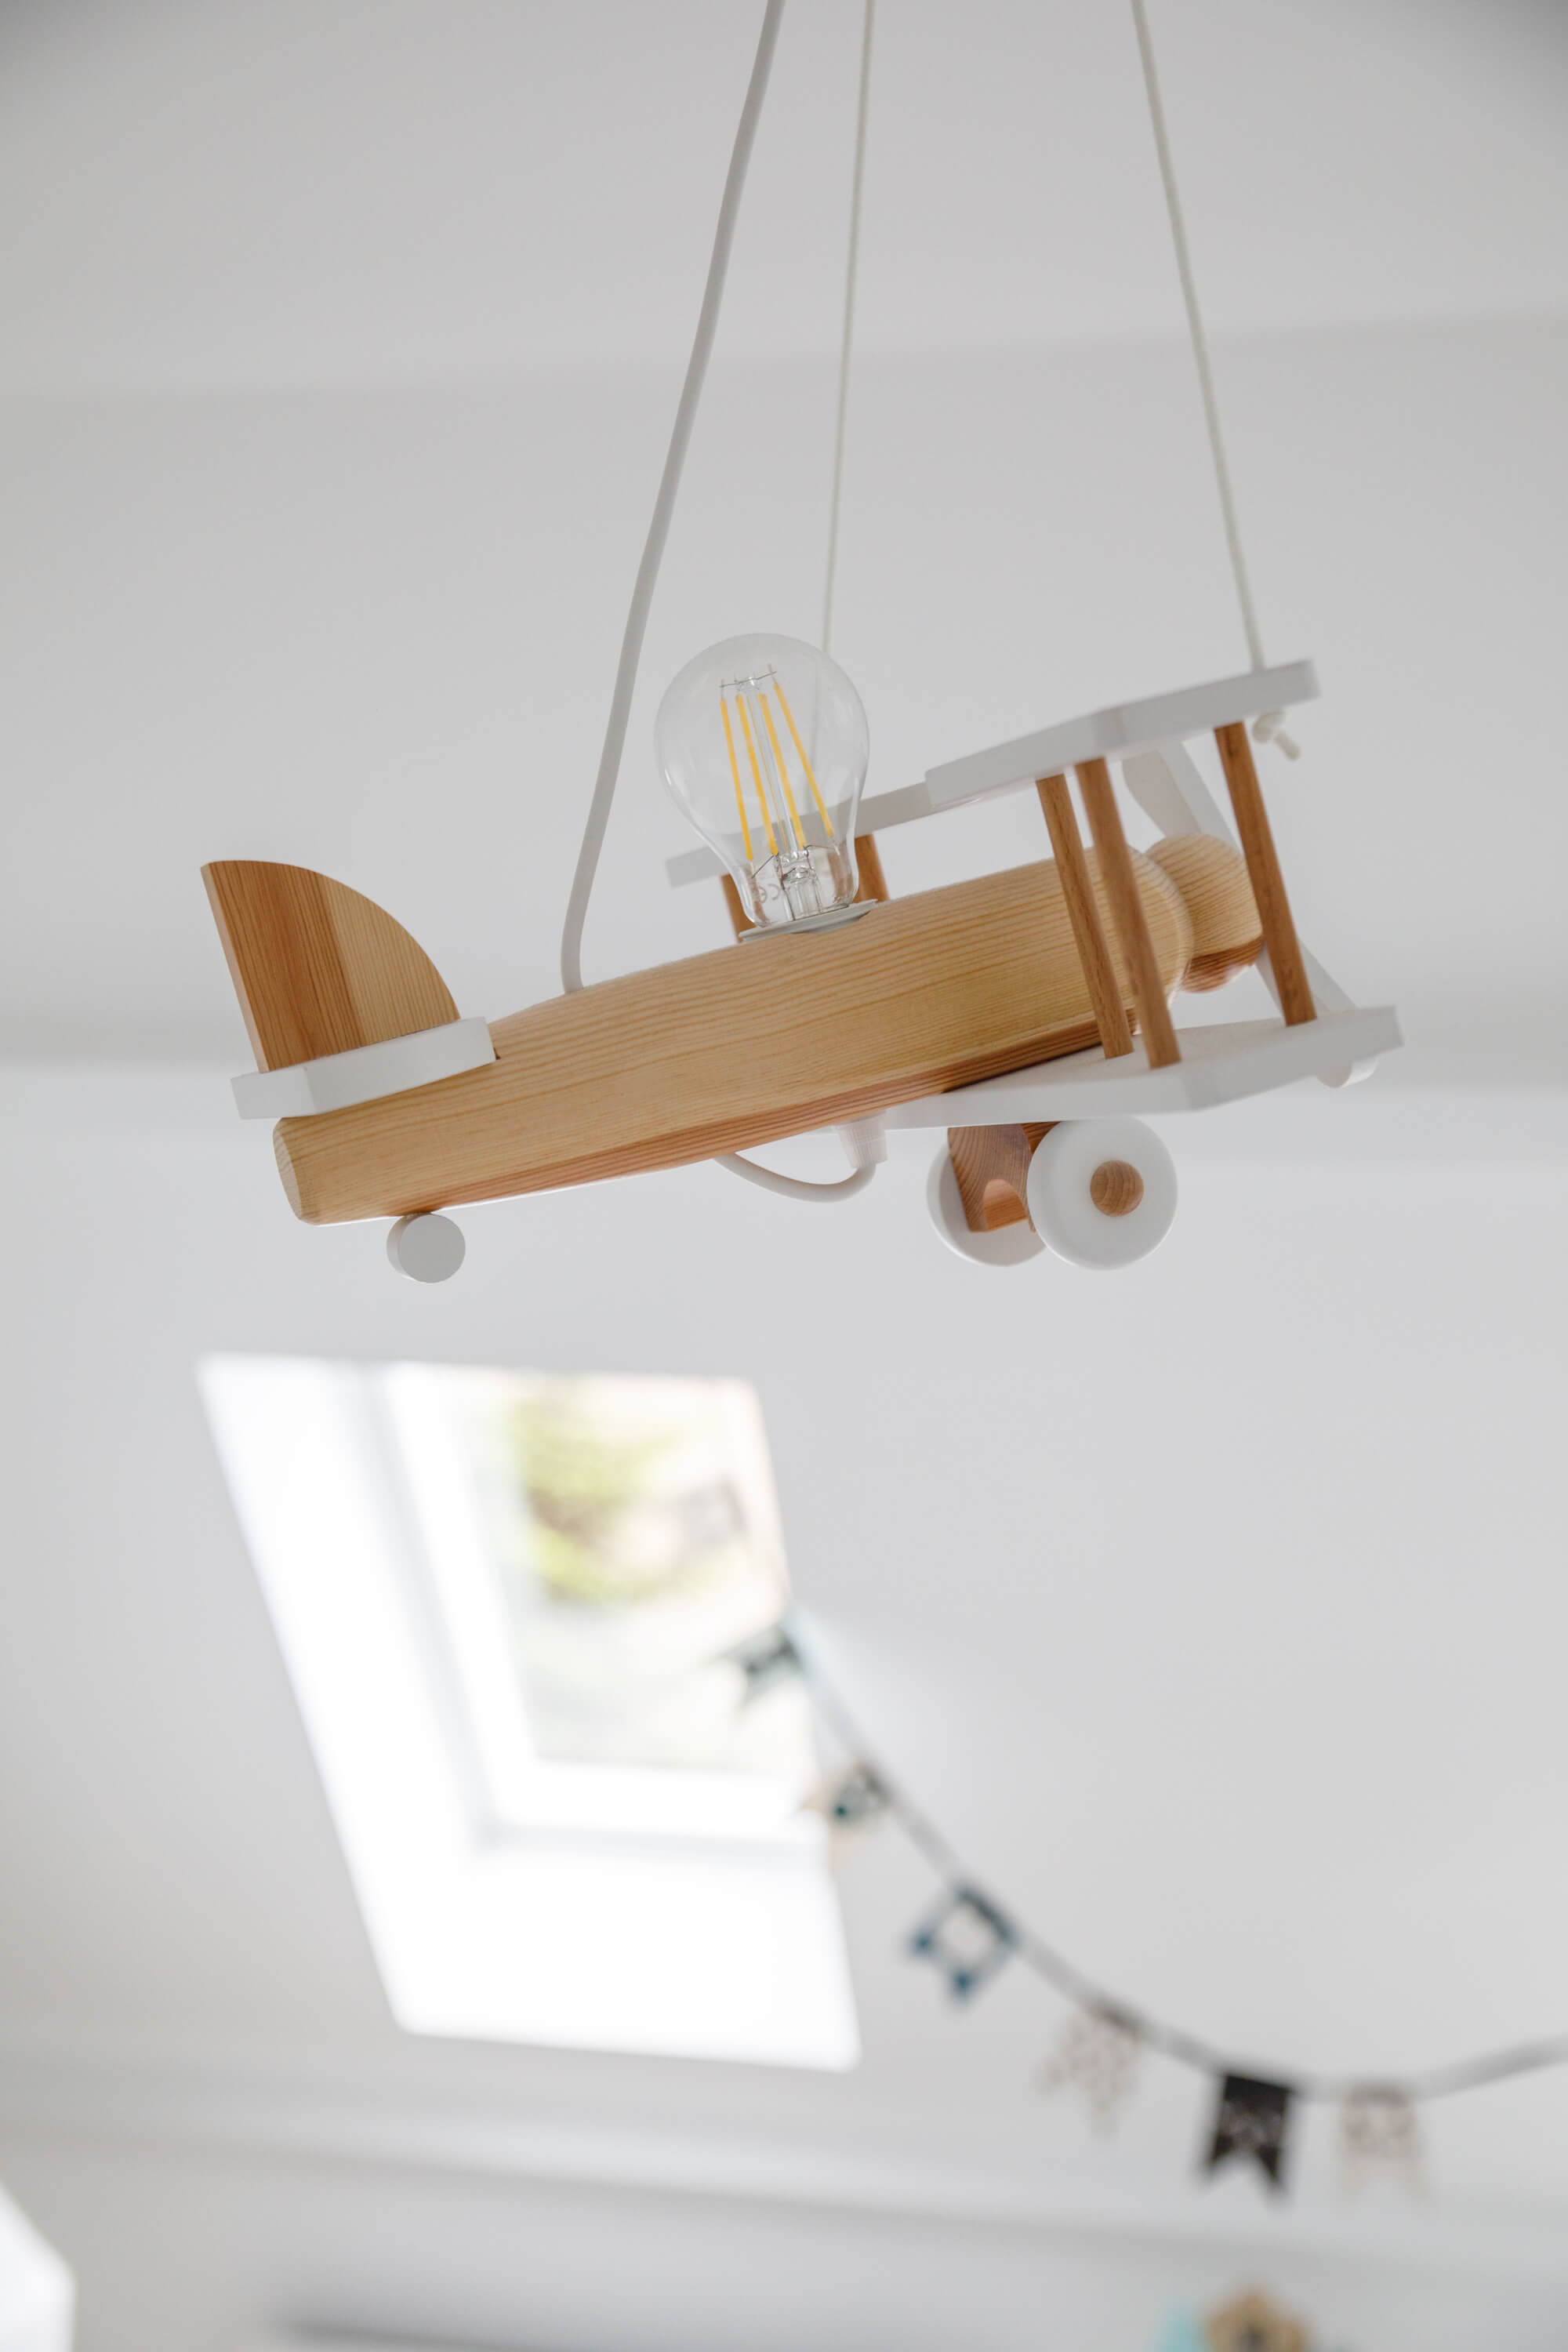 A wooden ceiling decoration in the shape of a plane